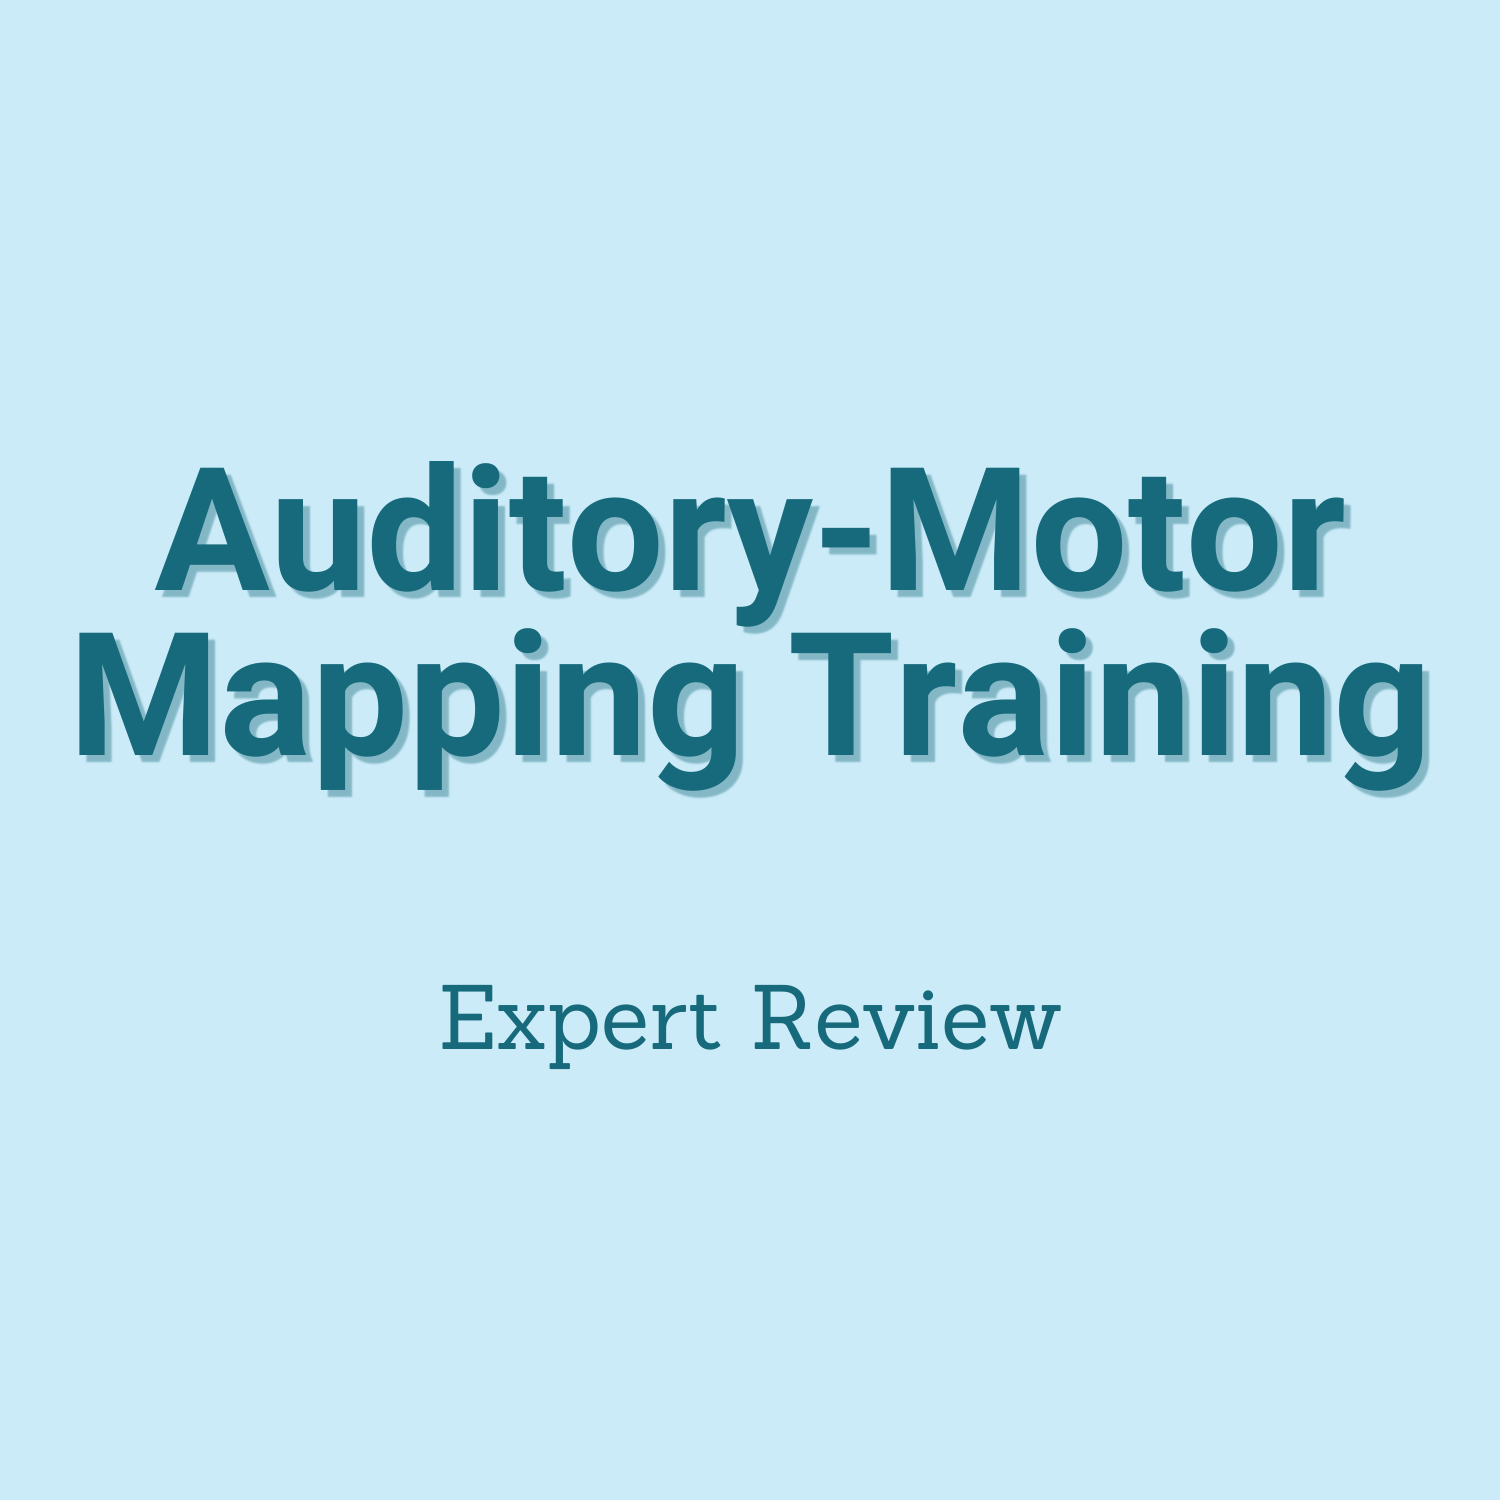 Auditory-Motor Mapping Training review